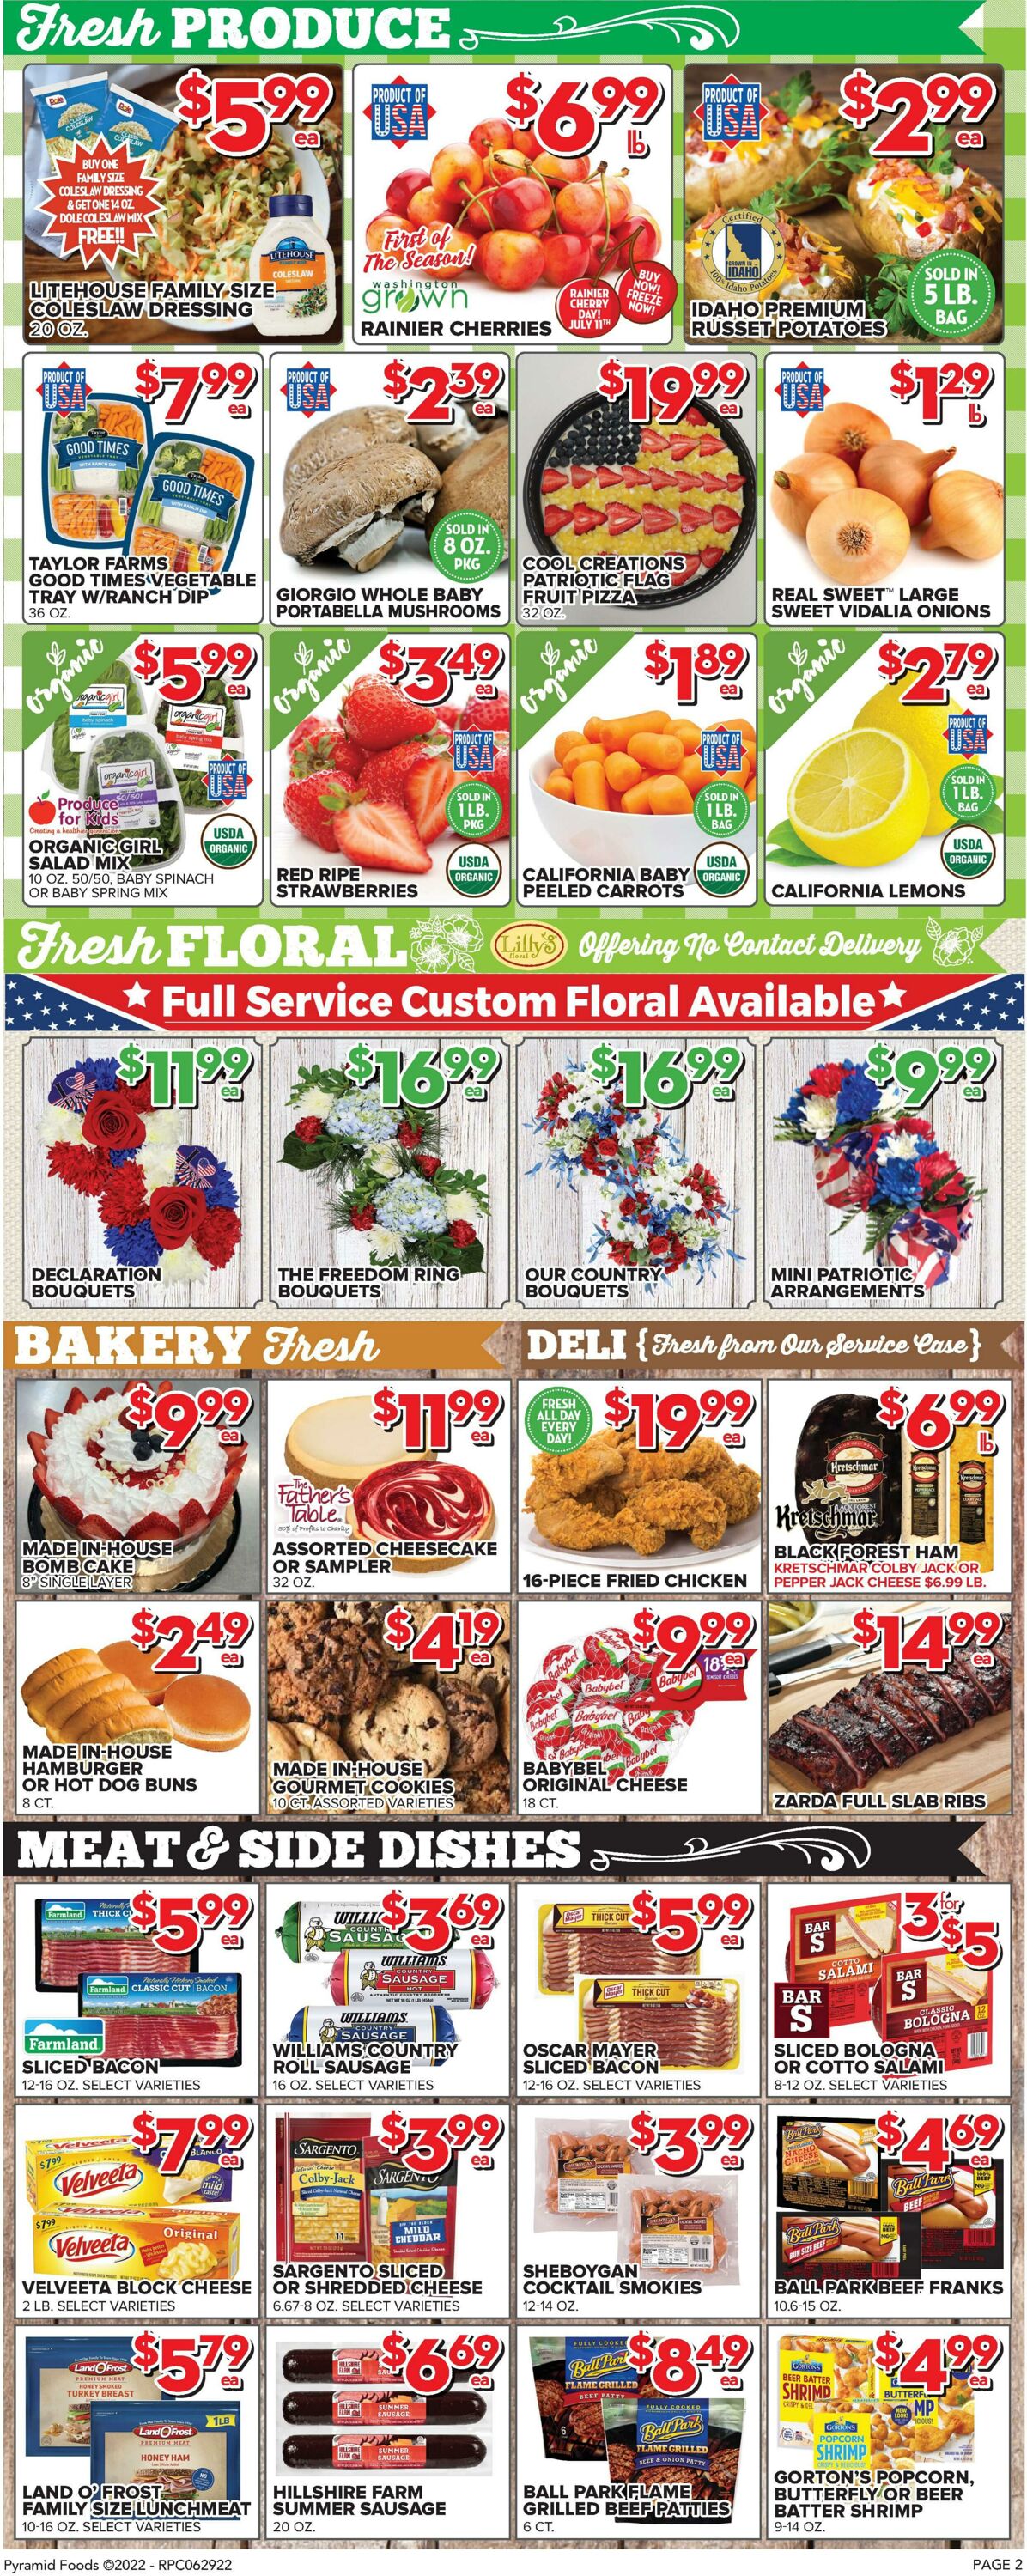 Weekly ad Price Cutter 06/29/2022 - 07/05/2022